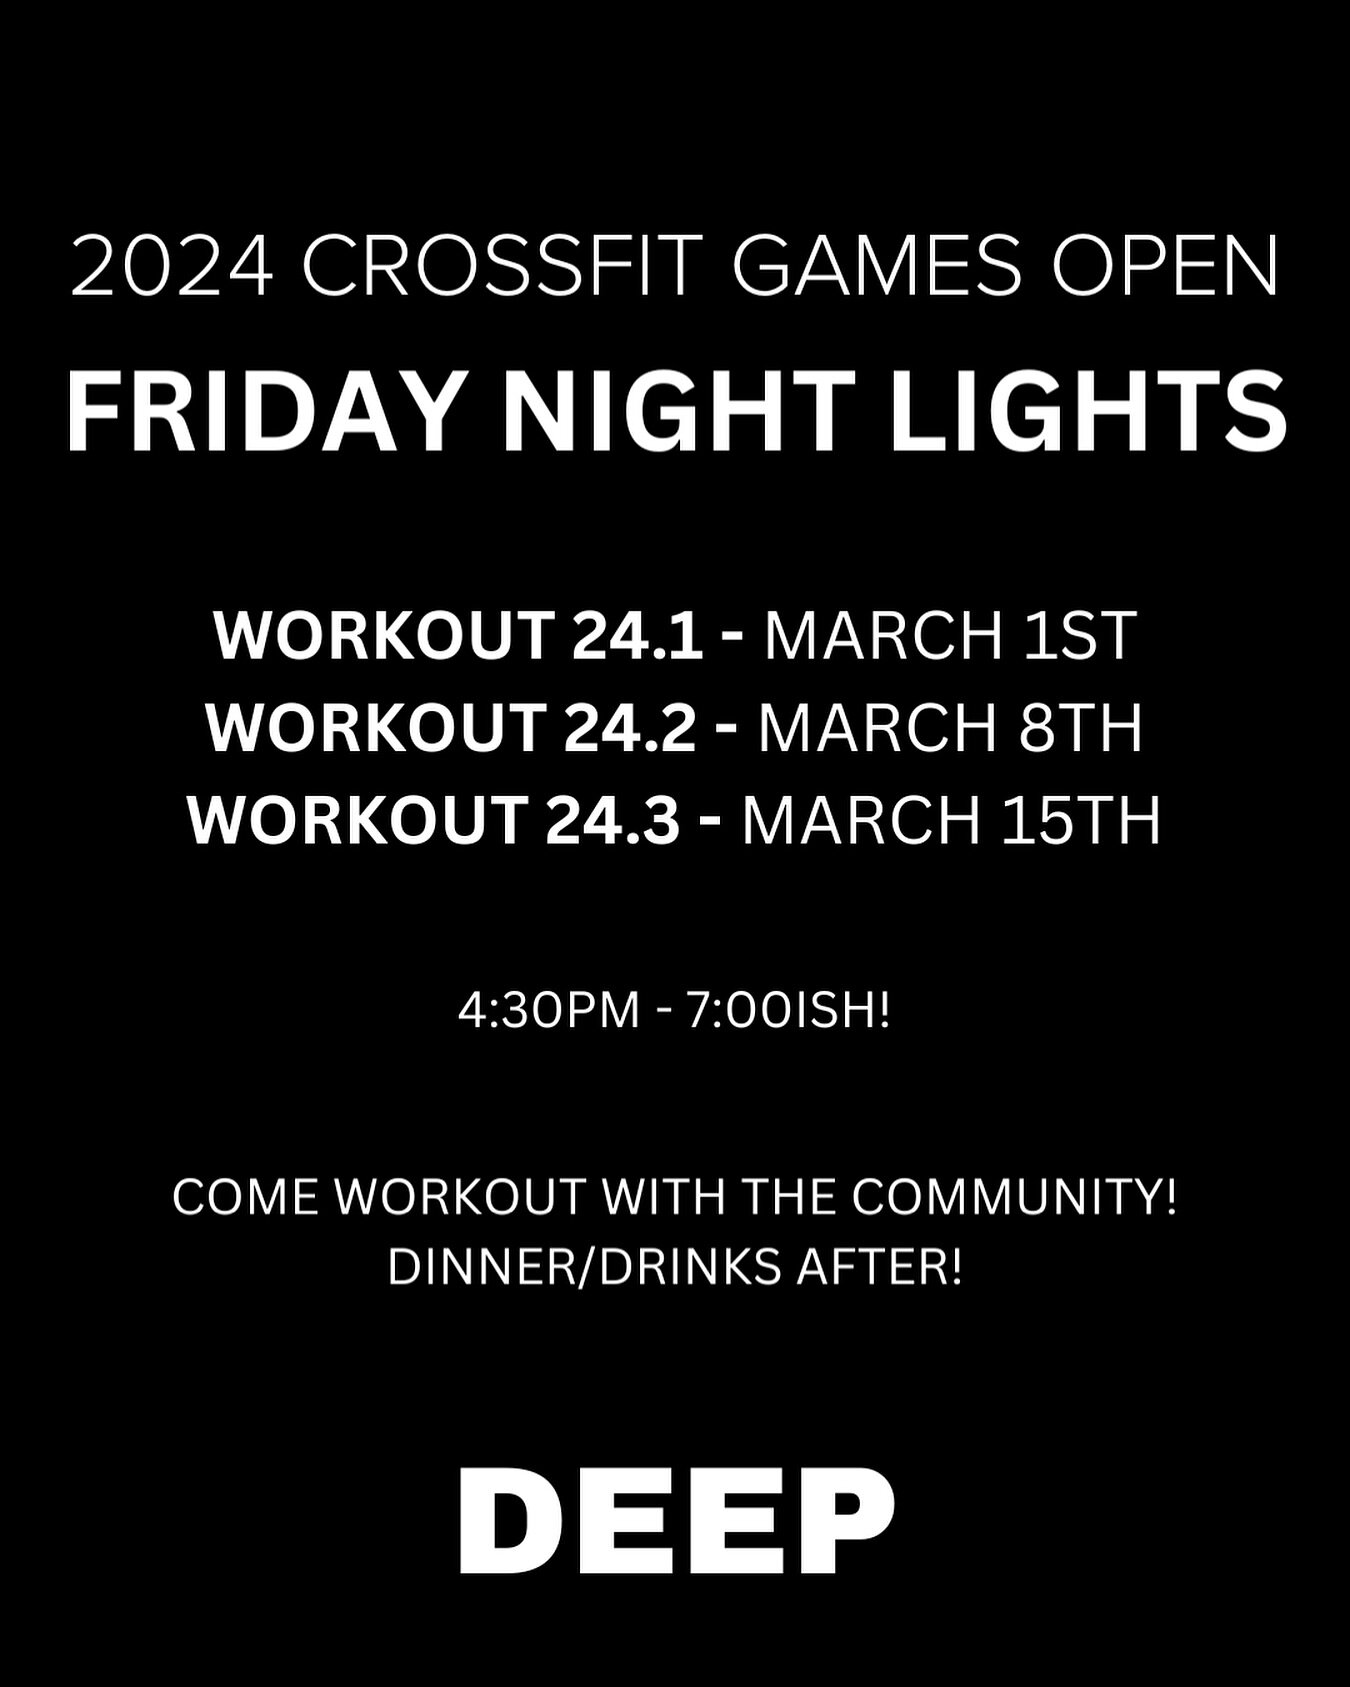 Come workout. 
Come hangout.

Bring your friends and family to cheer you on!! 

See everyone Friday night 😊

*message us to drop in!